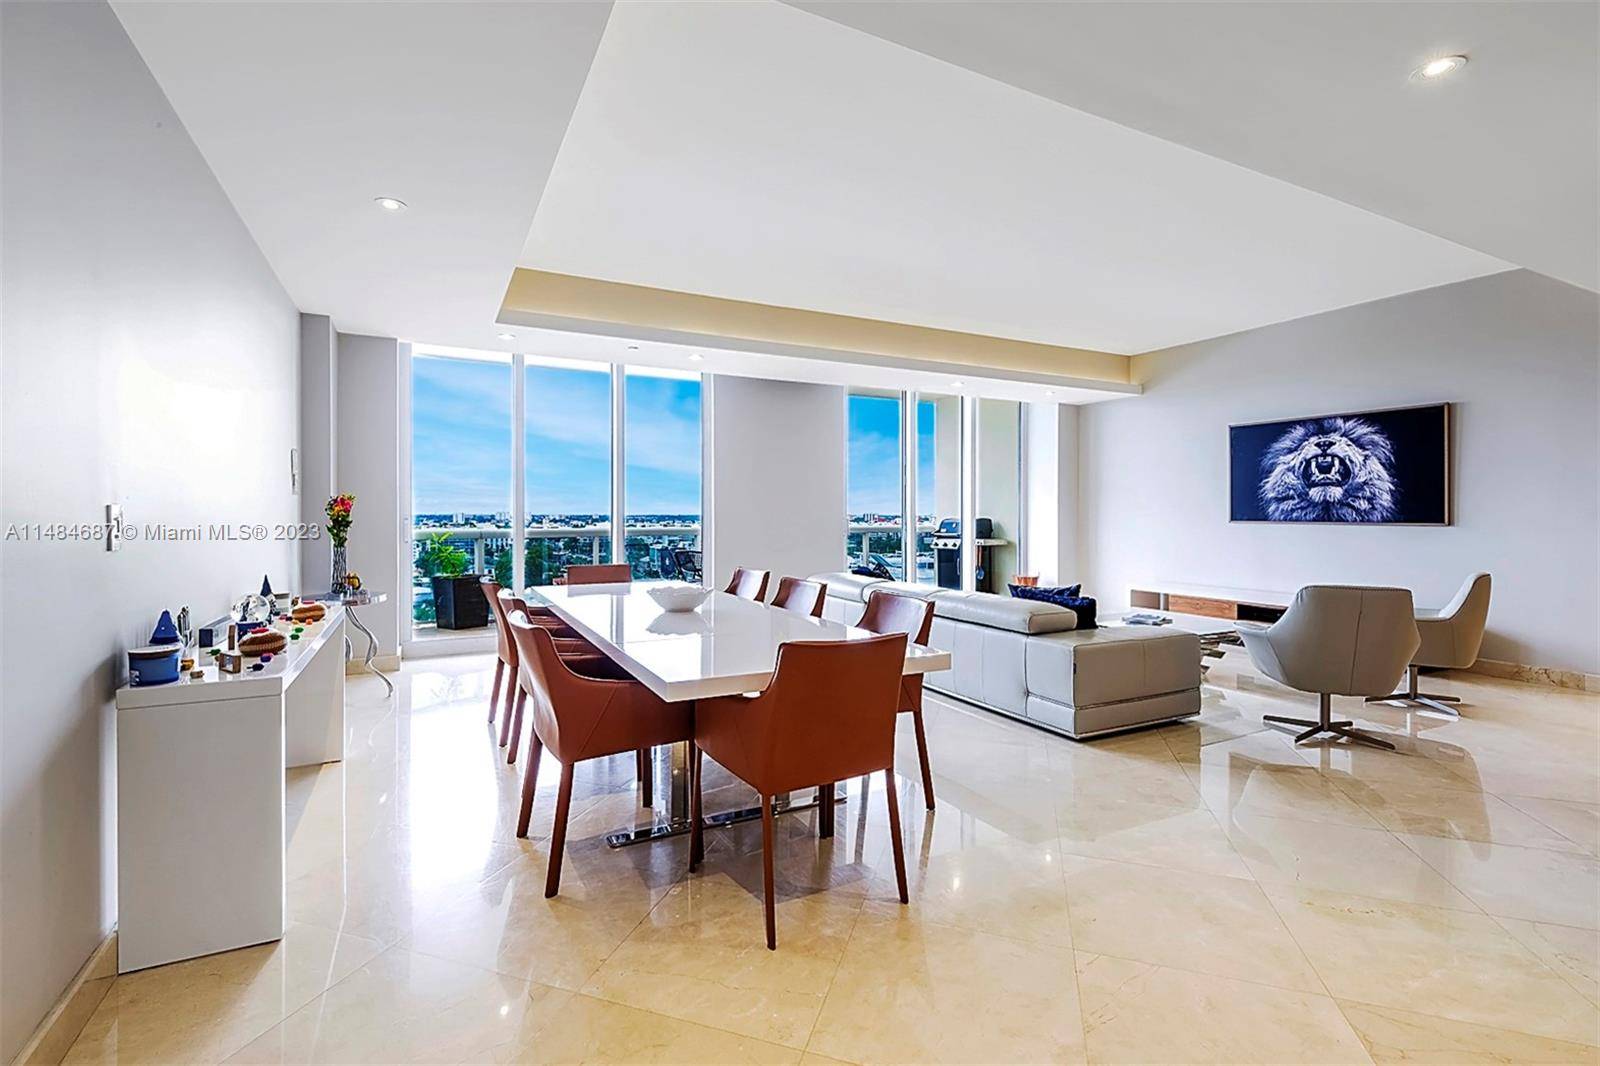 Discover the epitome of luxury living in this exceptional penthouse, offering 10 ft ceilings, impact windows, stunning city bay views from oversized terraces.